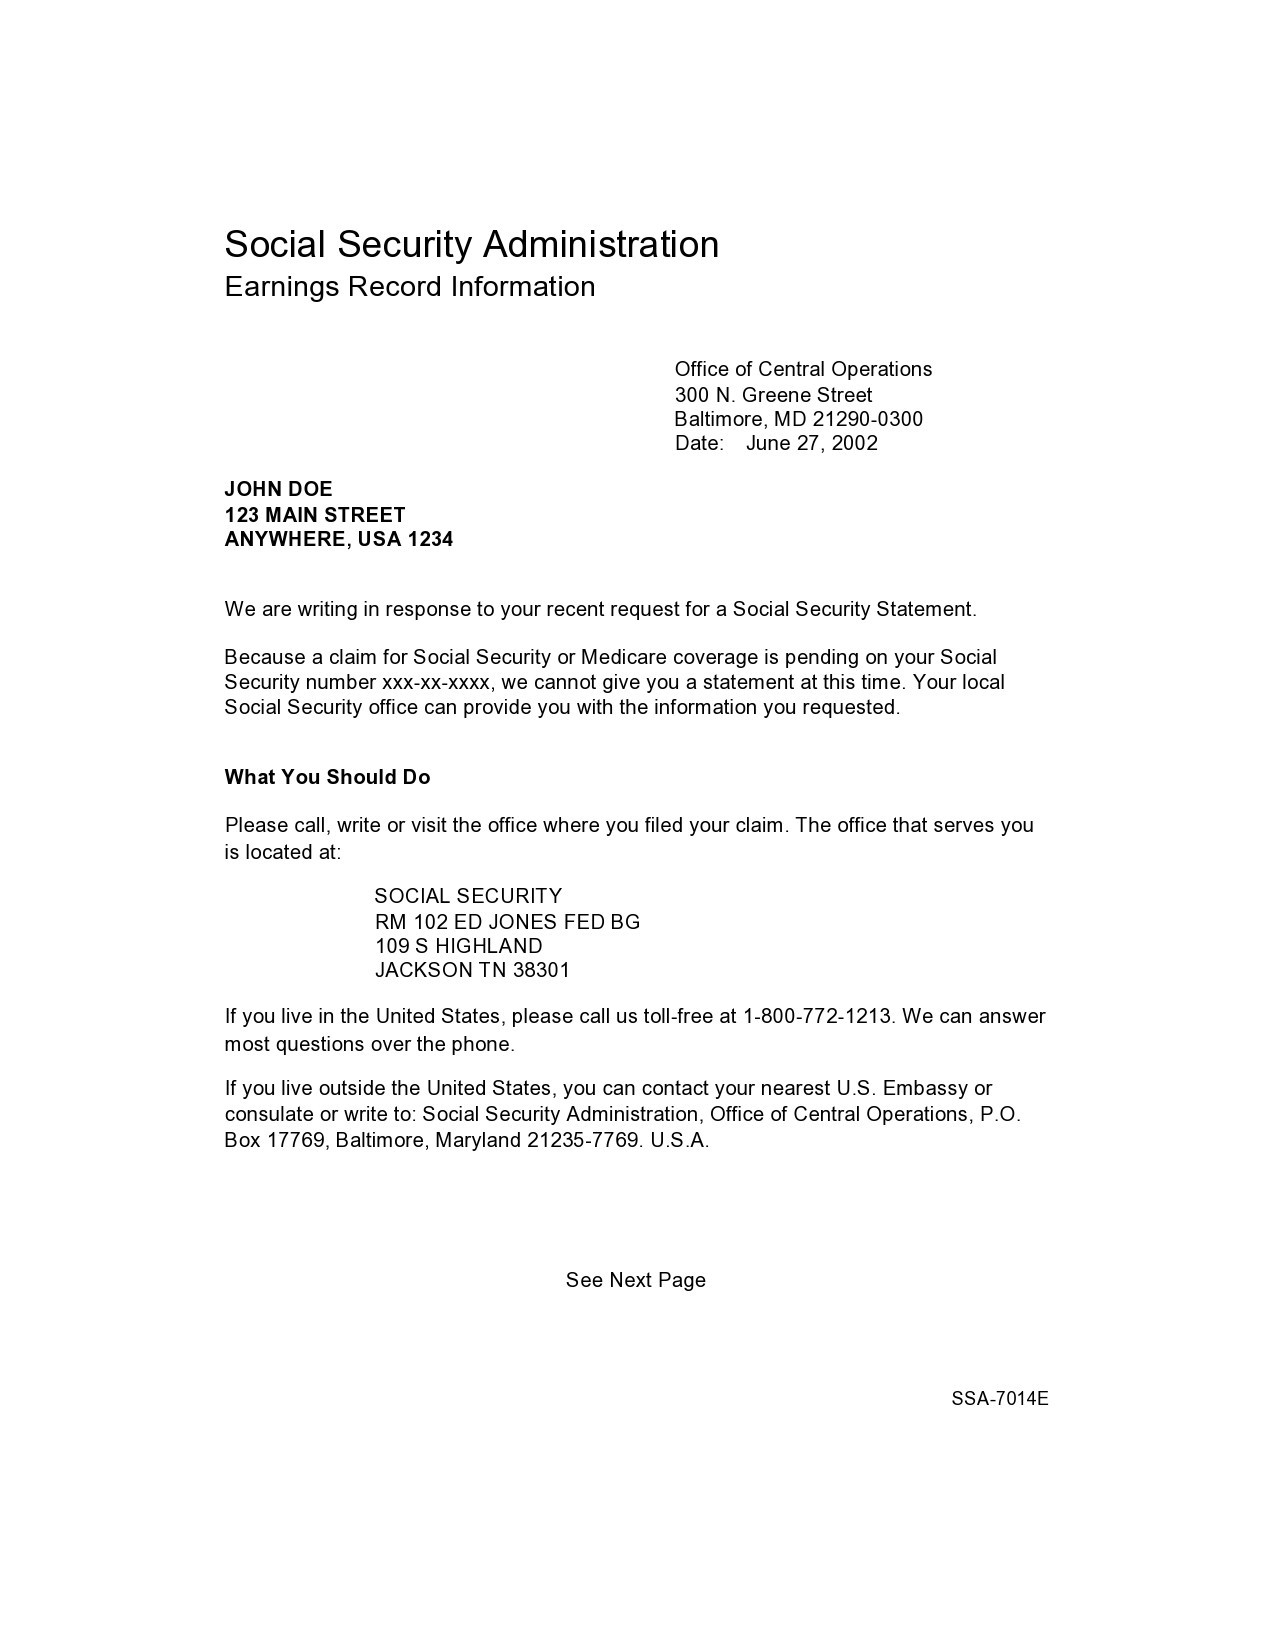 Free social security number verification letter 06